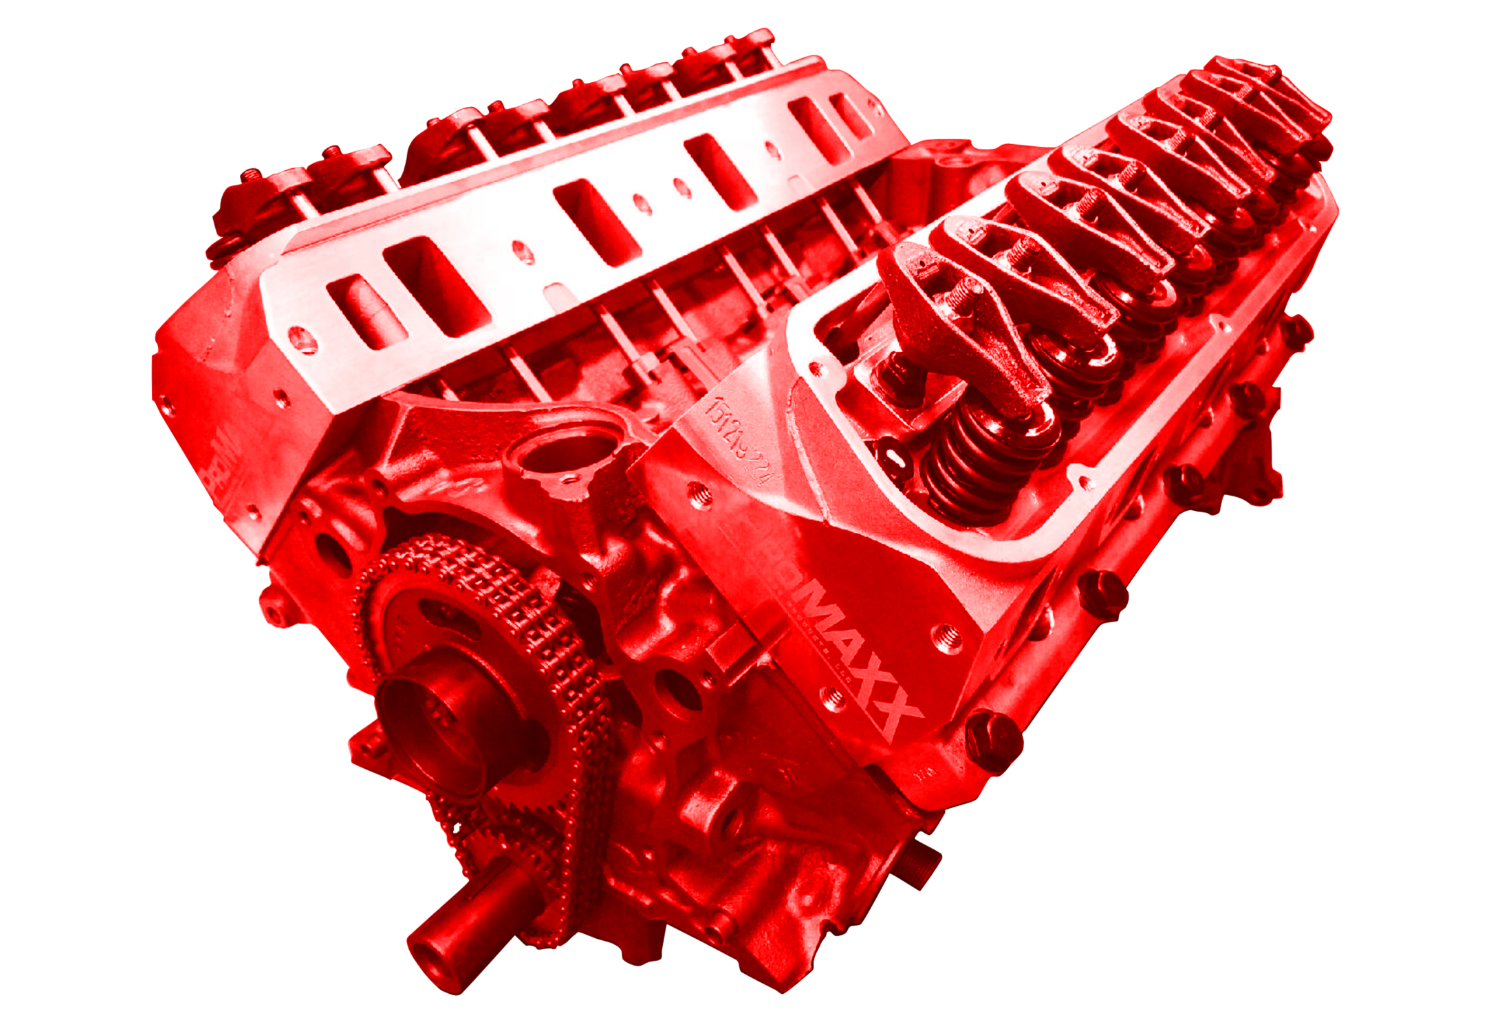 S&J-Ford-5.6L-347-ci-remanufactured-stroker-long-block-engine